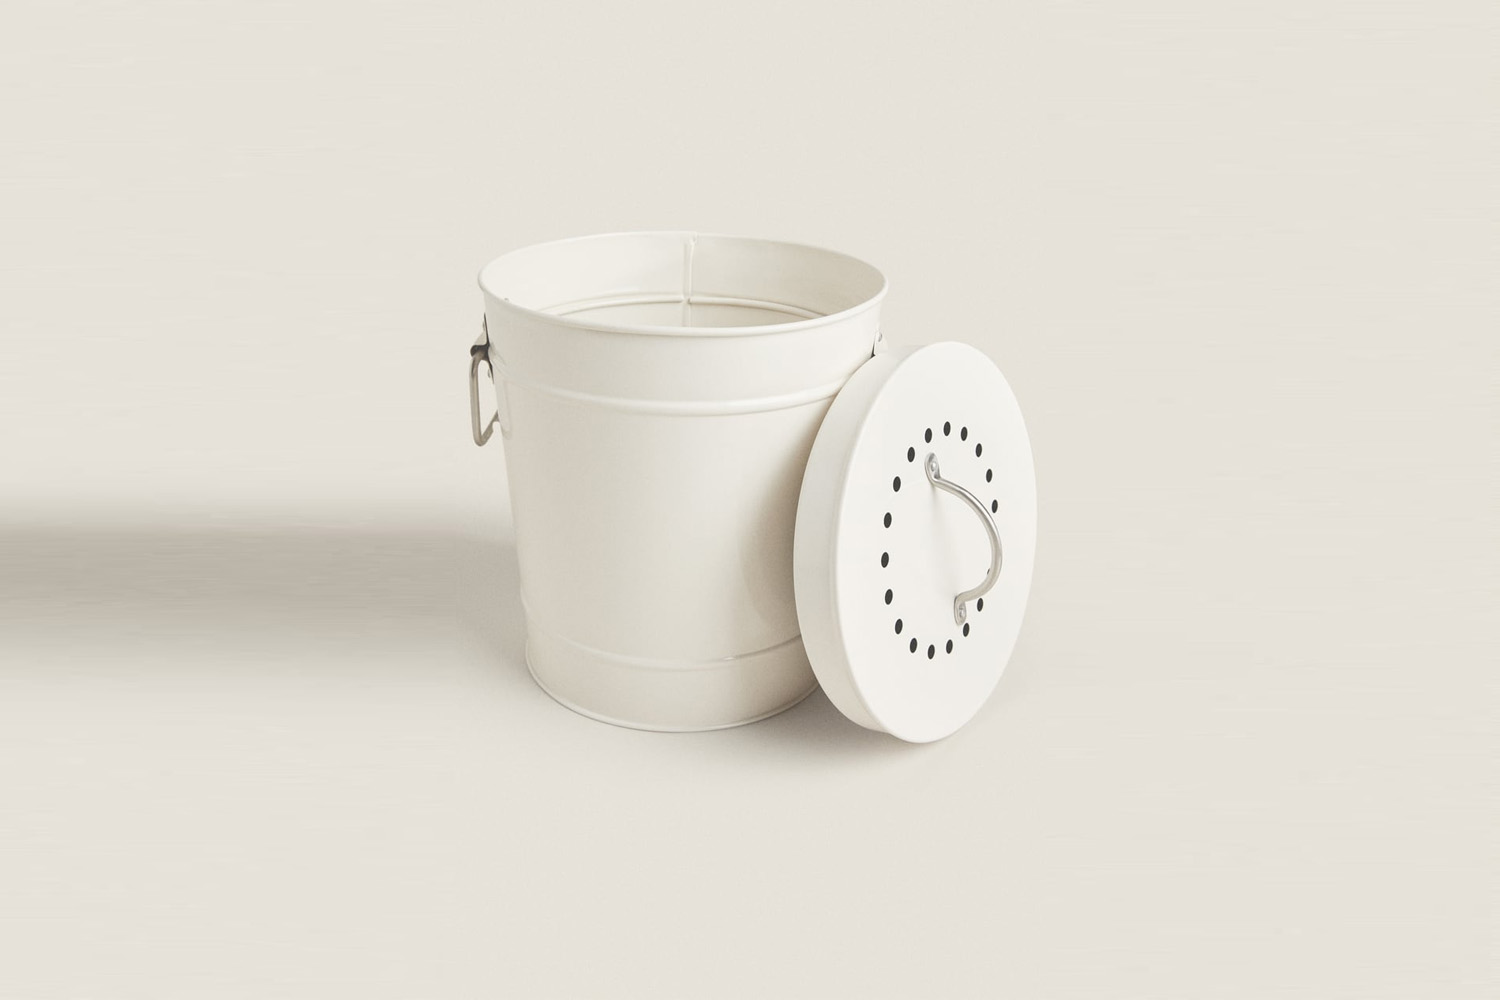 From Zara Home, the Stainless Steel Compost Bin is \$49.90.